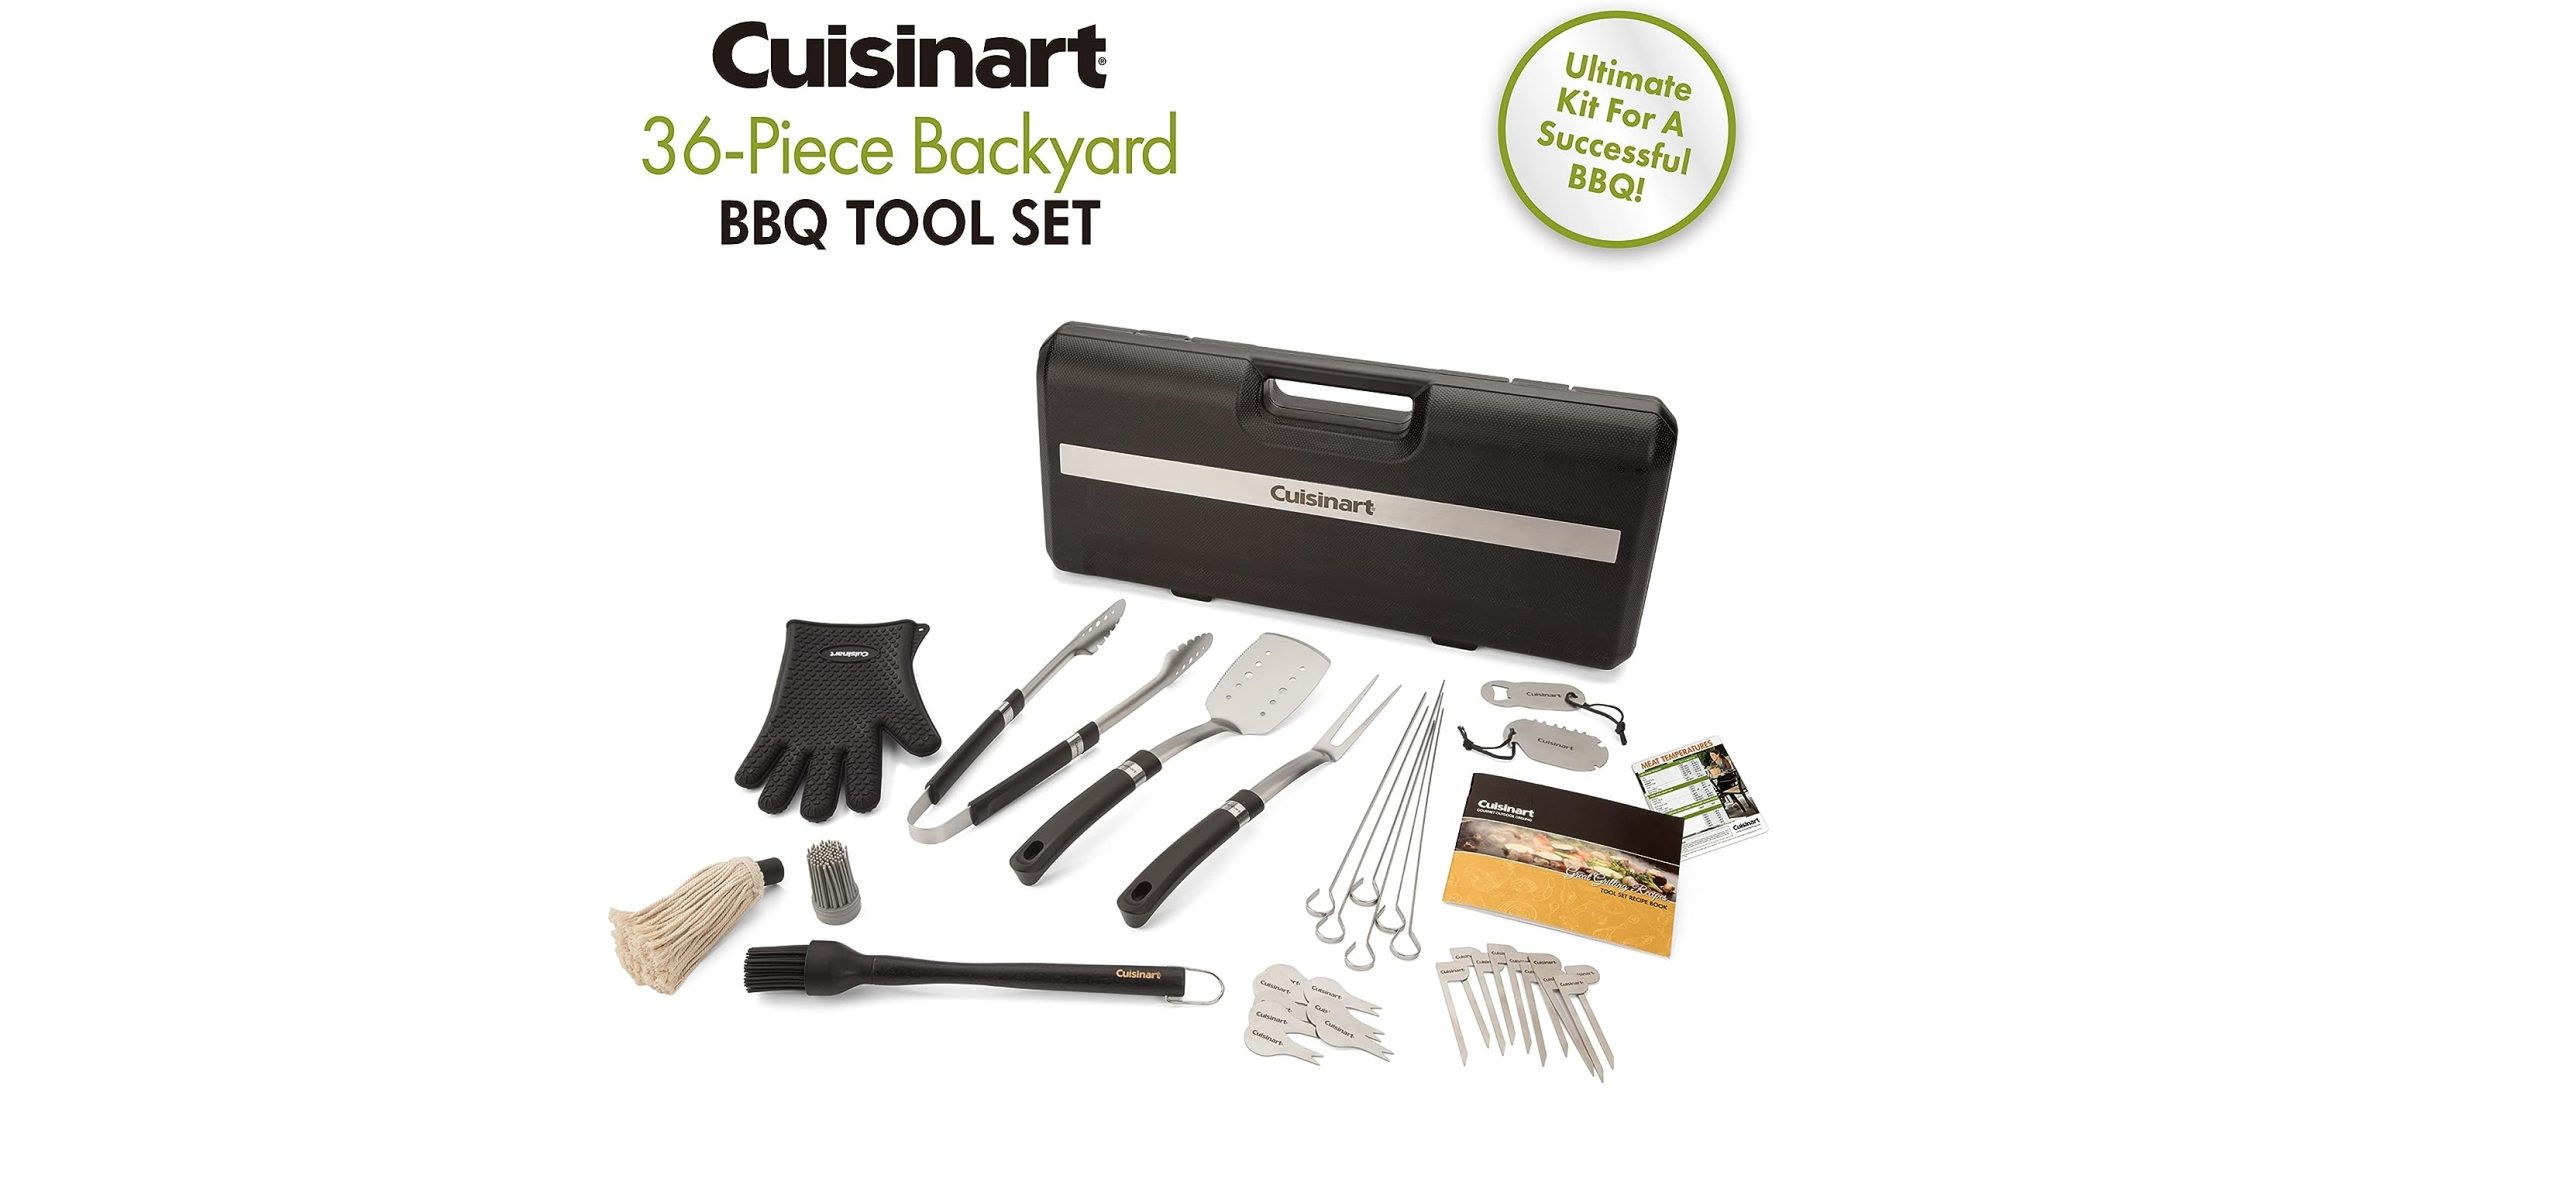 Cuisinart CGS-8036 Grill, BBQ Tool Set, 36-Piece - One of The Most Popular Christmas Gift Ideas for Women